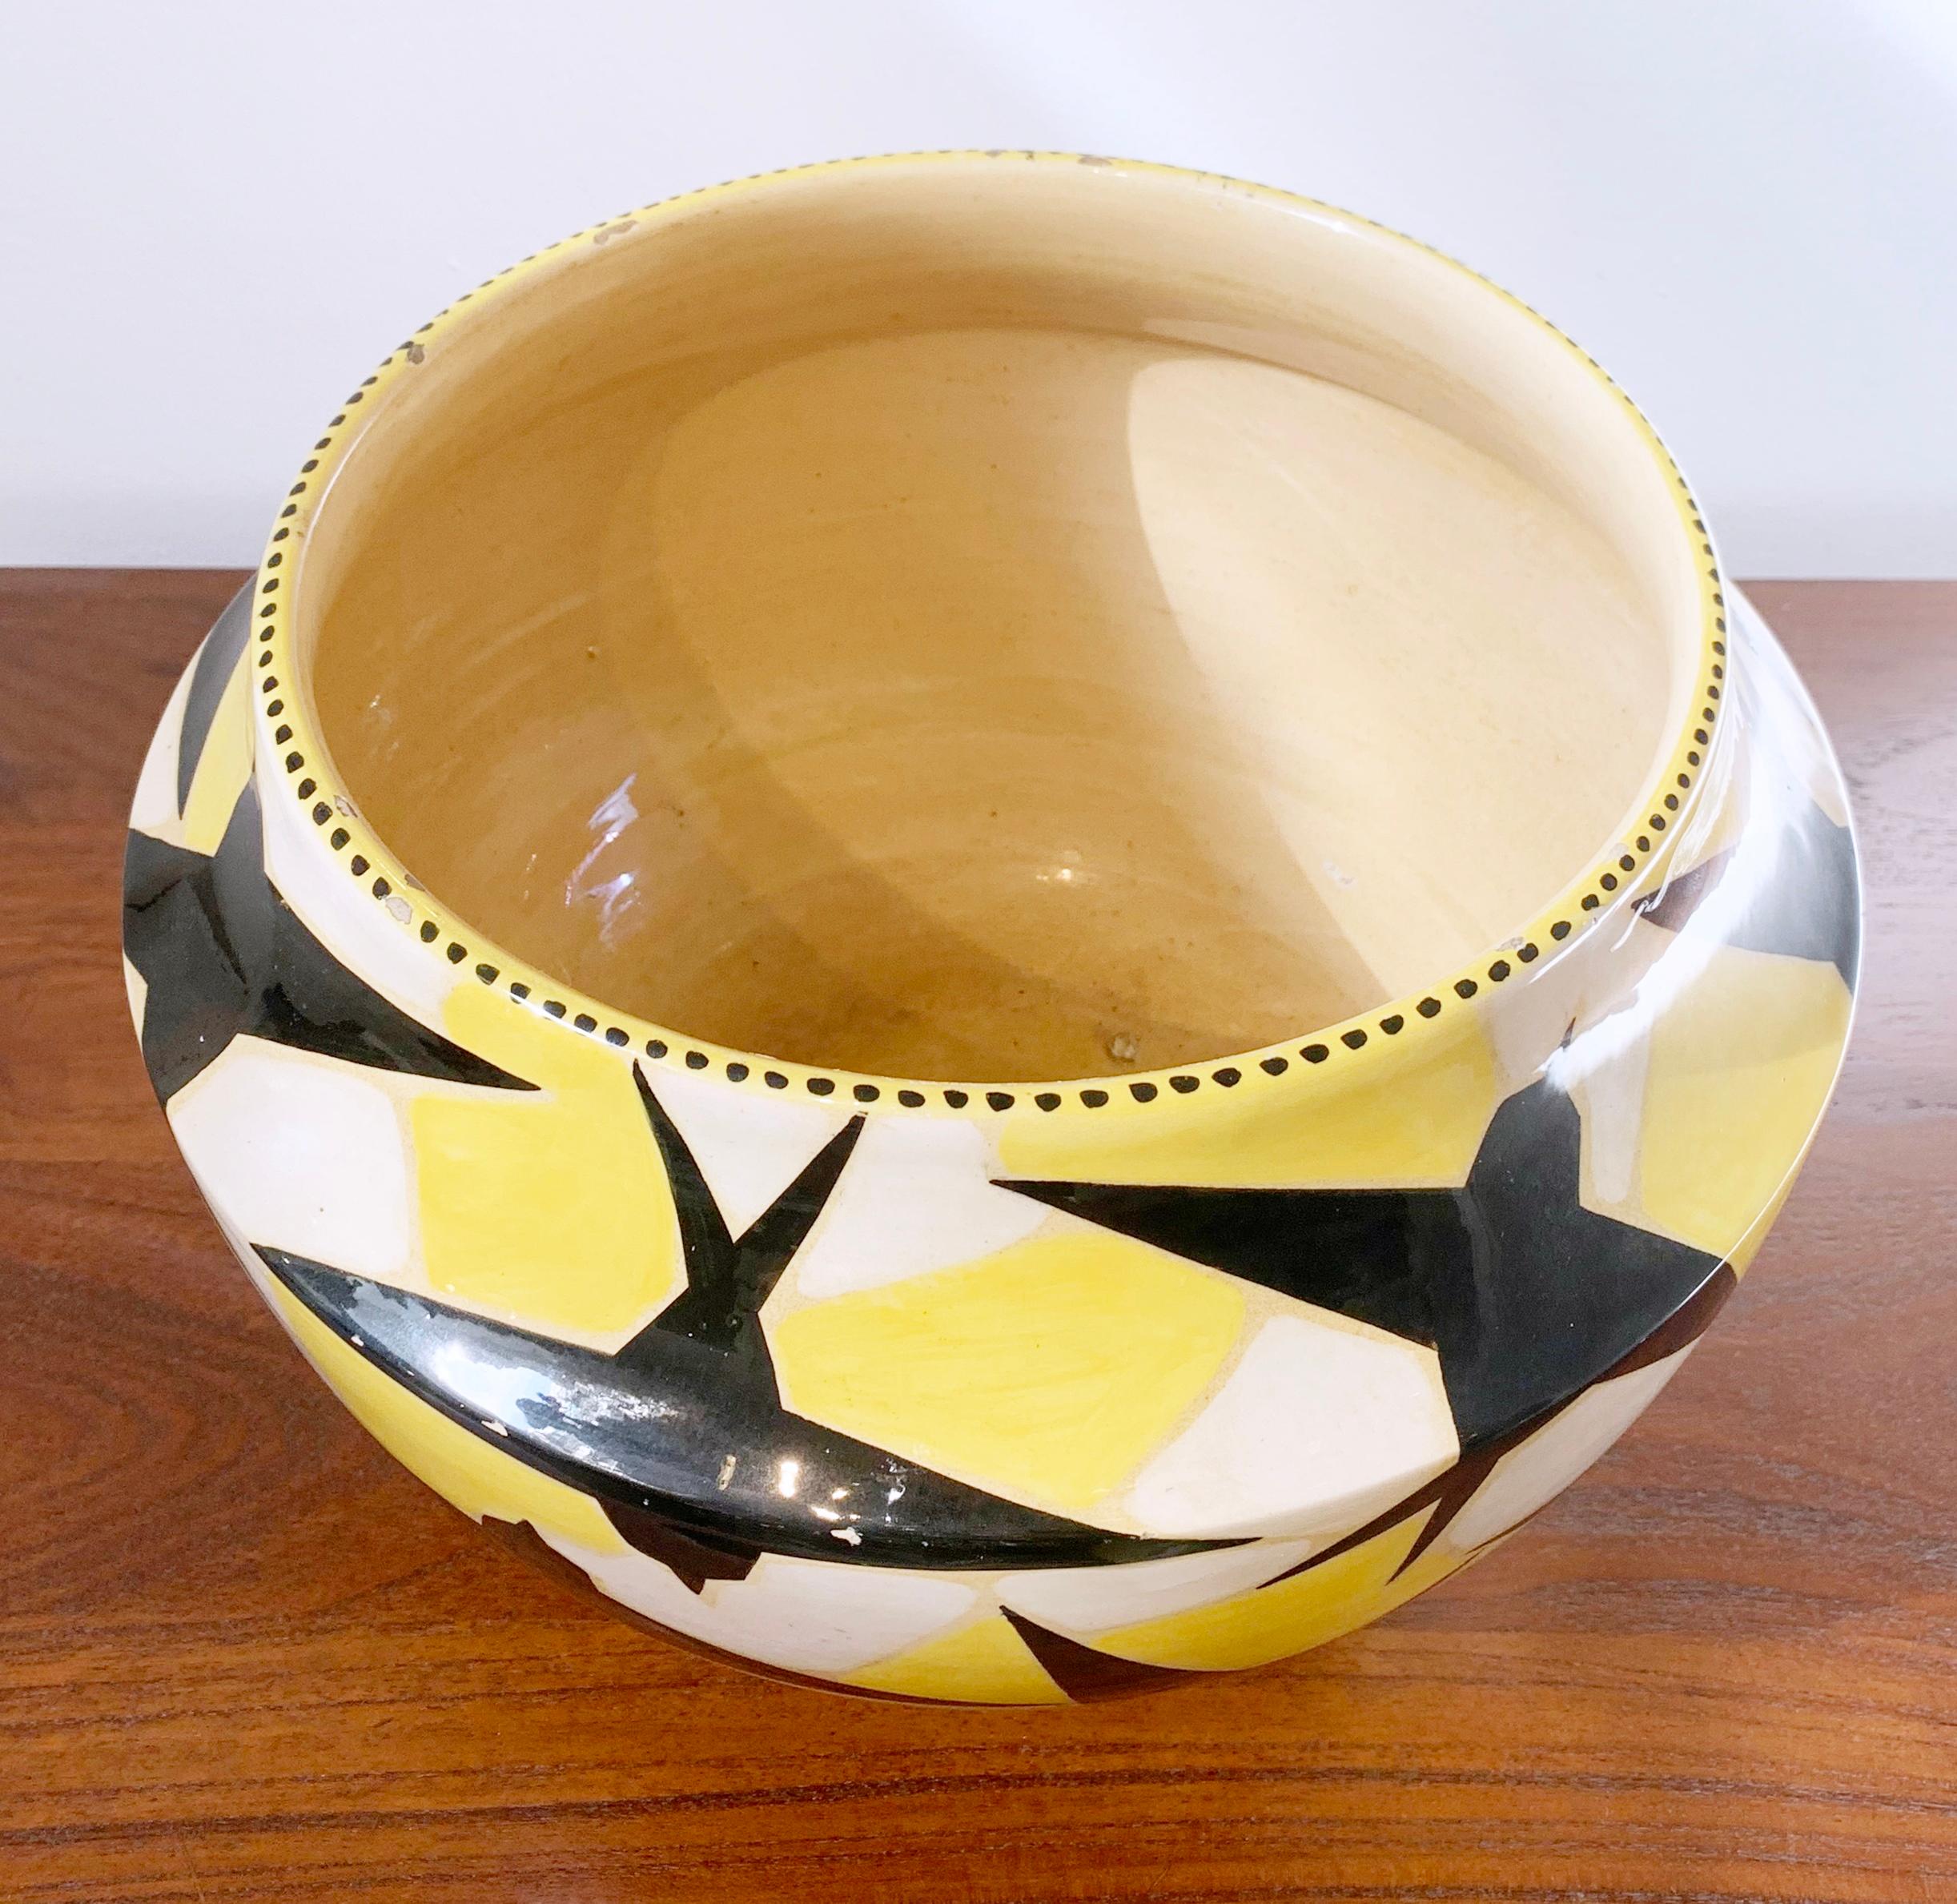 Ceramic Vase signed by Fenice Albisola for Manlio Trucco - Italy 1930.